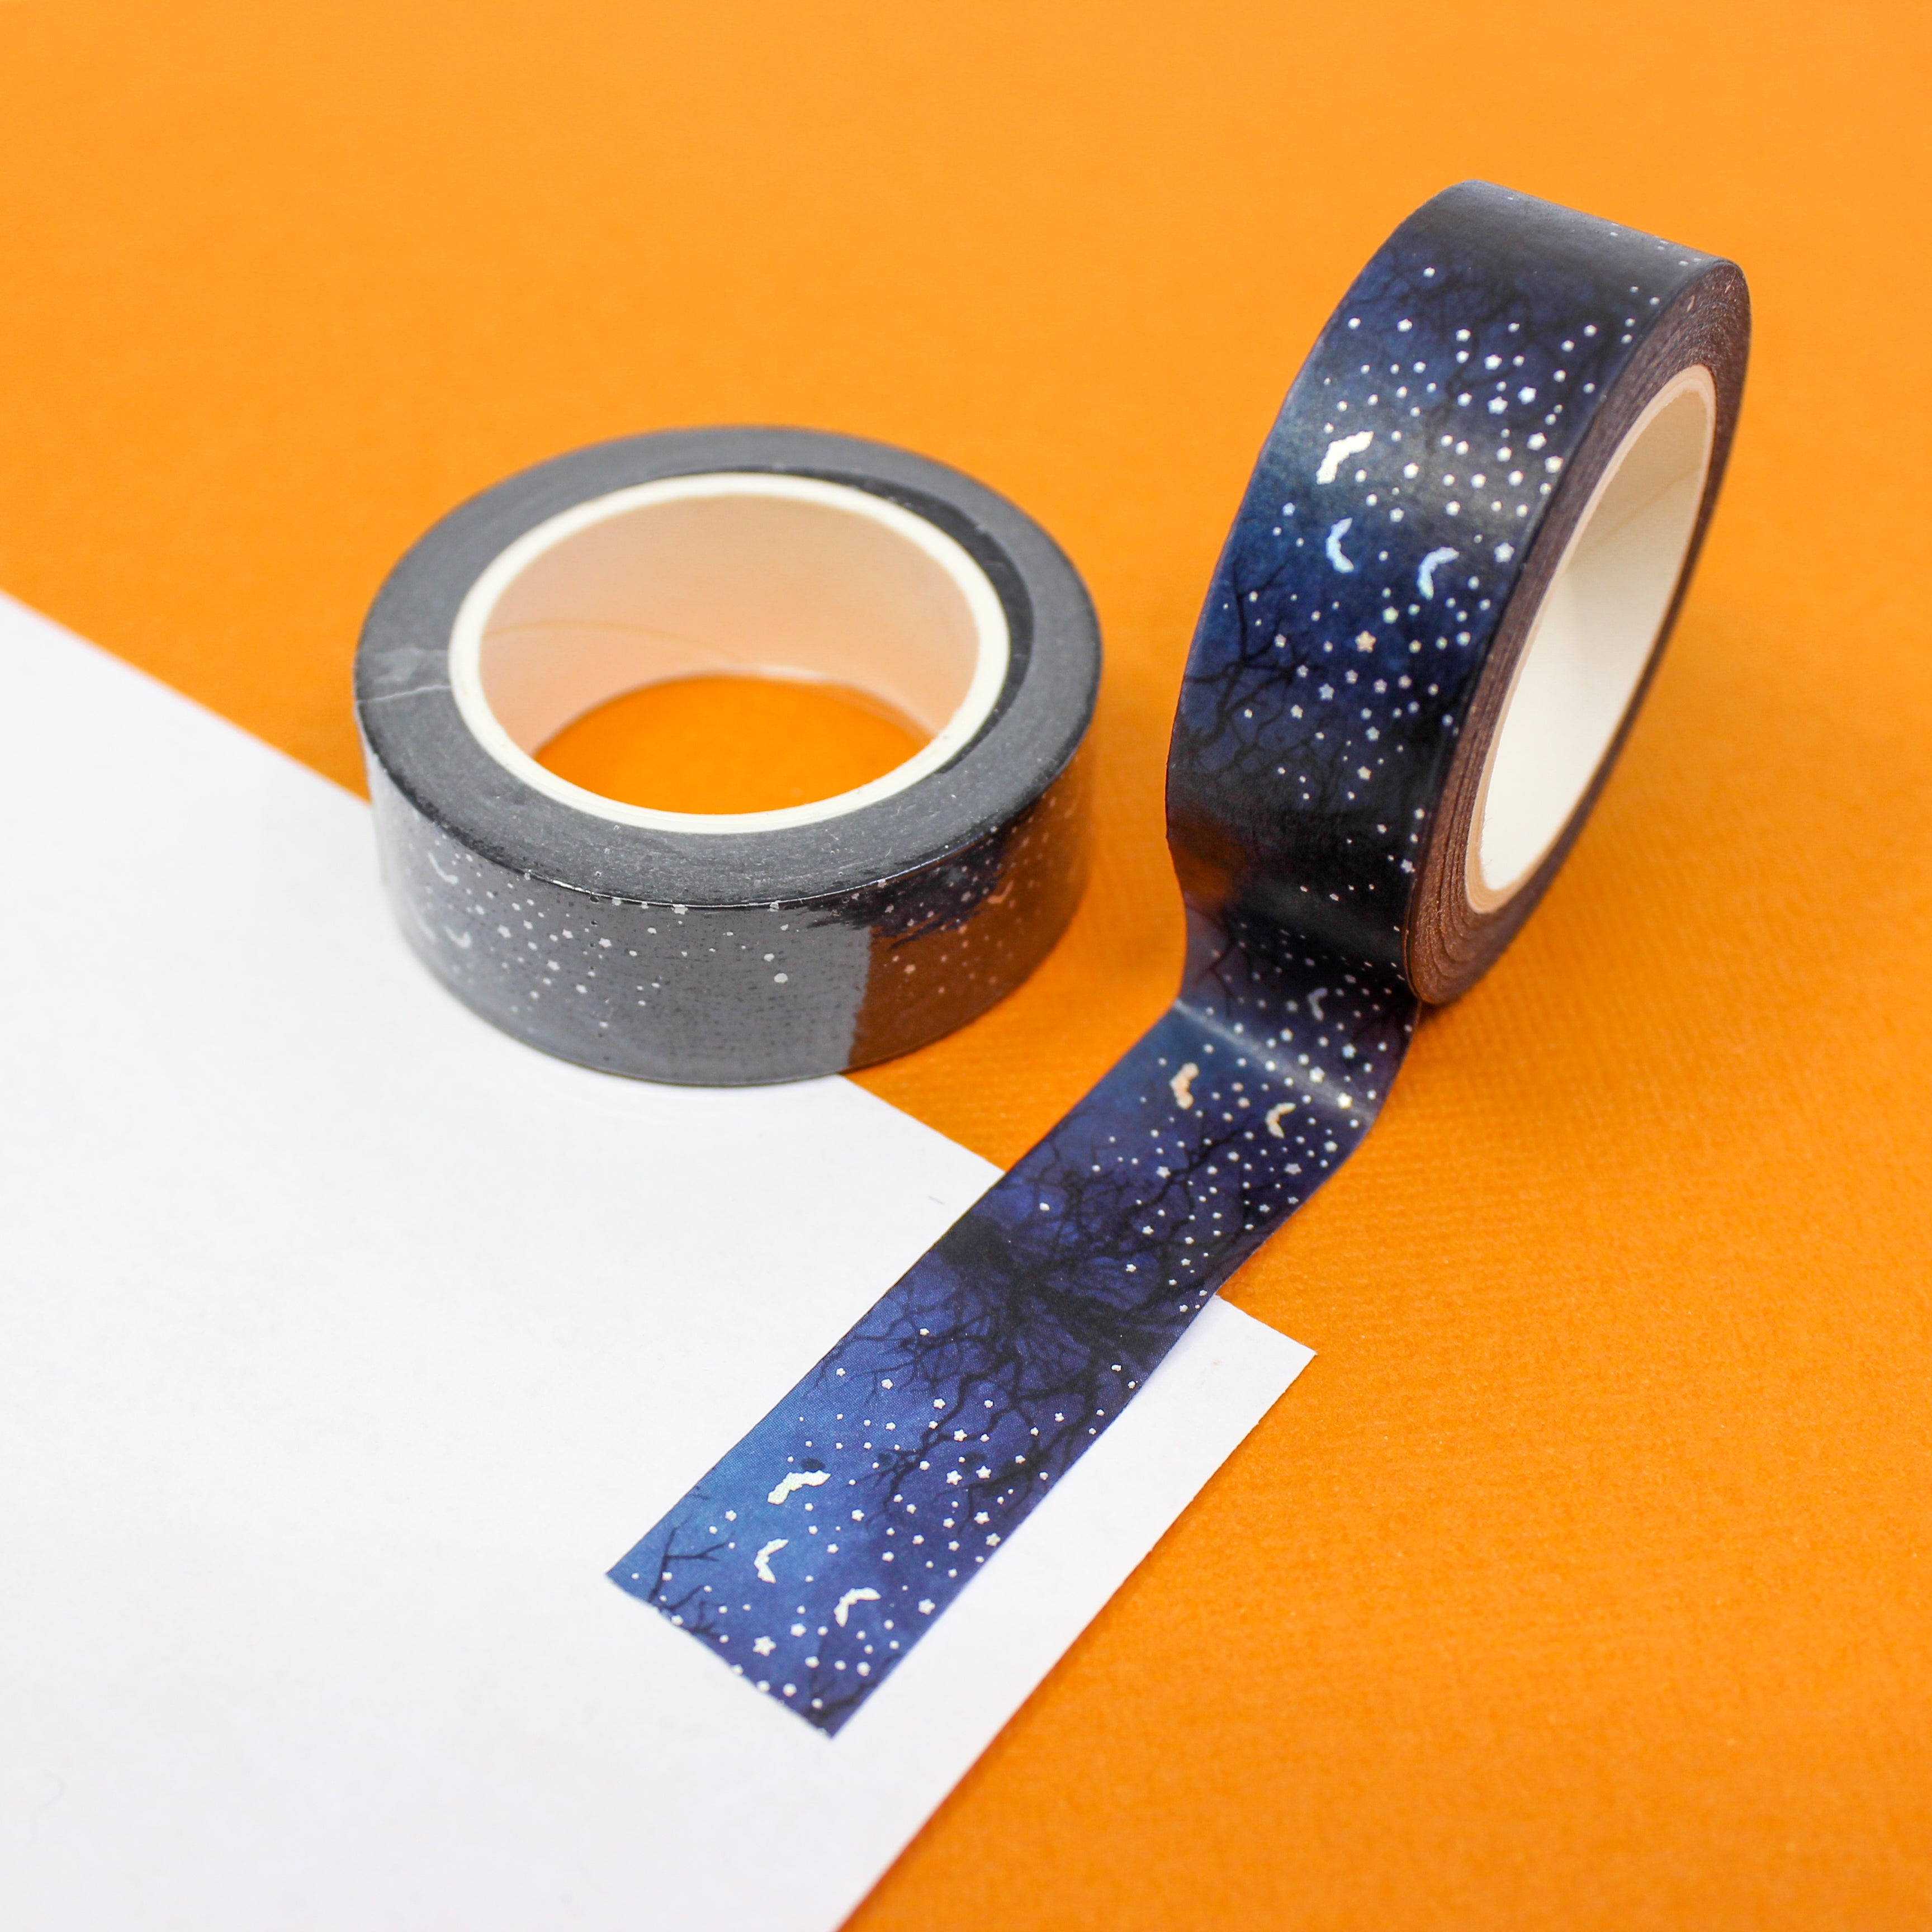 This is a silver foil Halloween bats washi tape from BBB Supplies Craft Shop